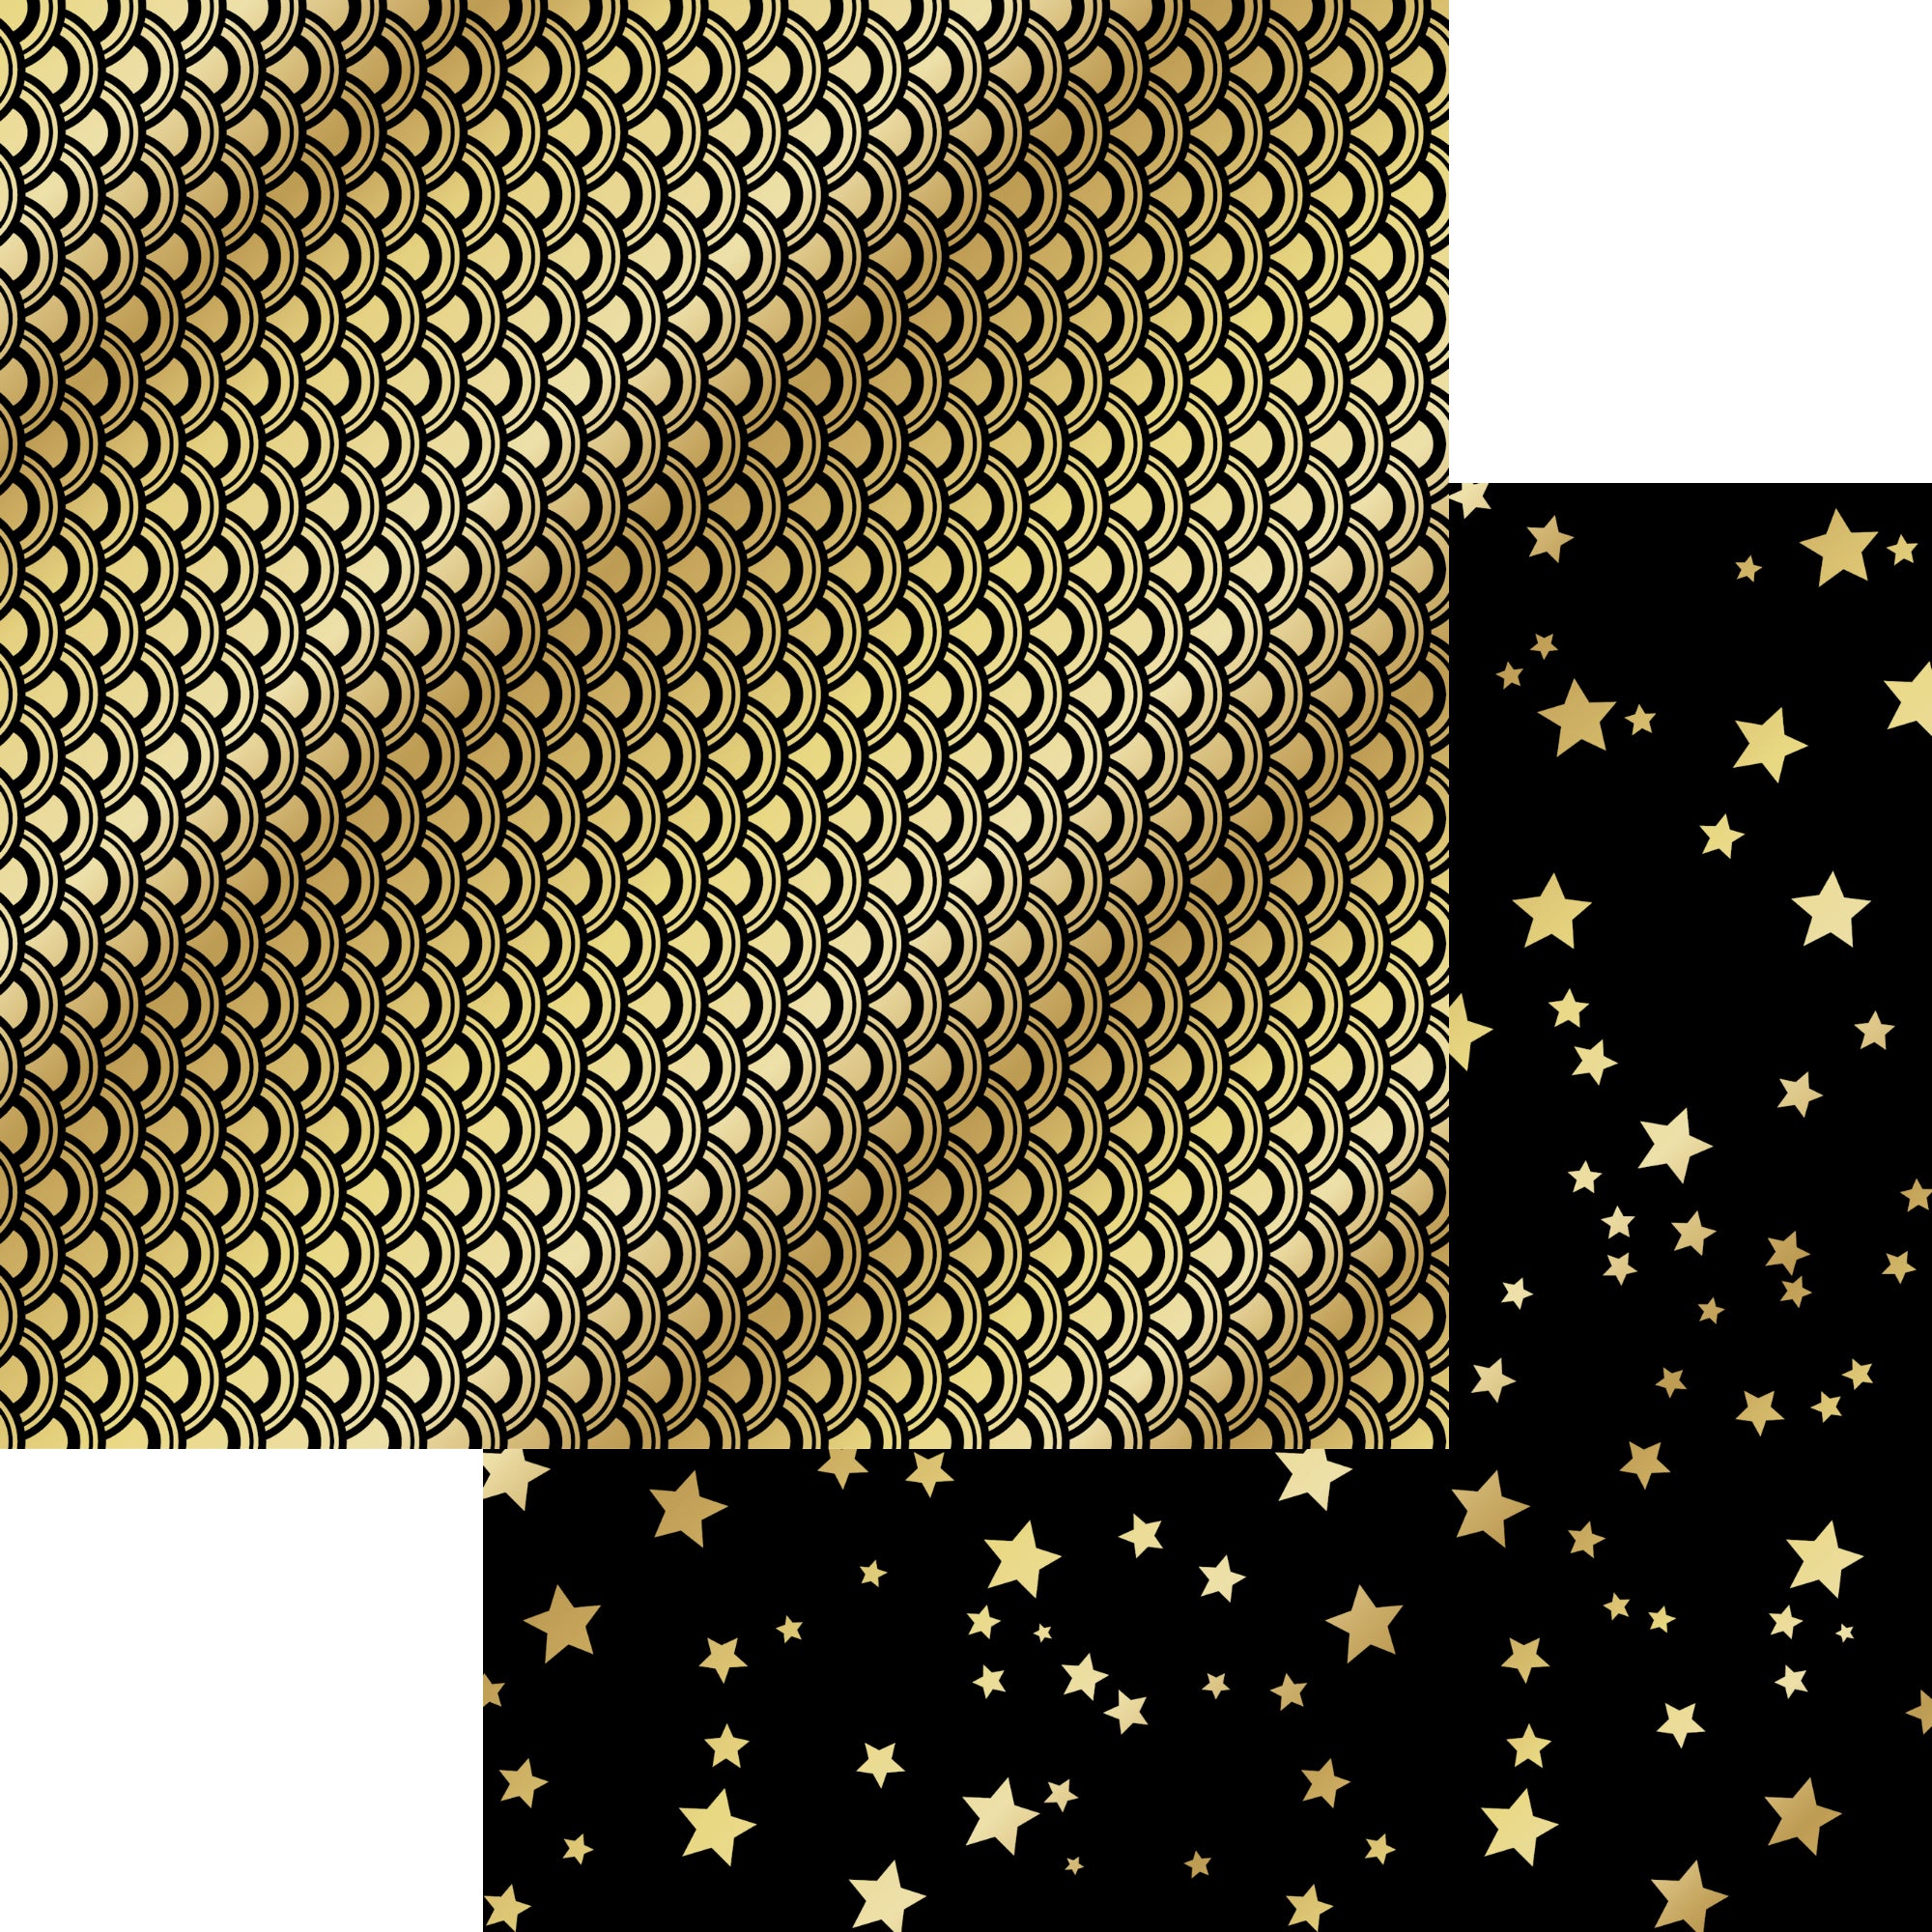 Movie Time Collection Glitz & Glamour 12 x 12 Double-Sided Scrapbook Paper by SSC Designs